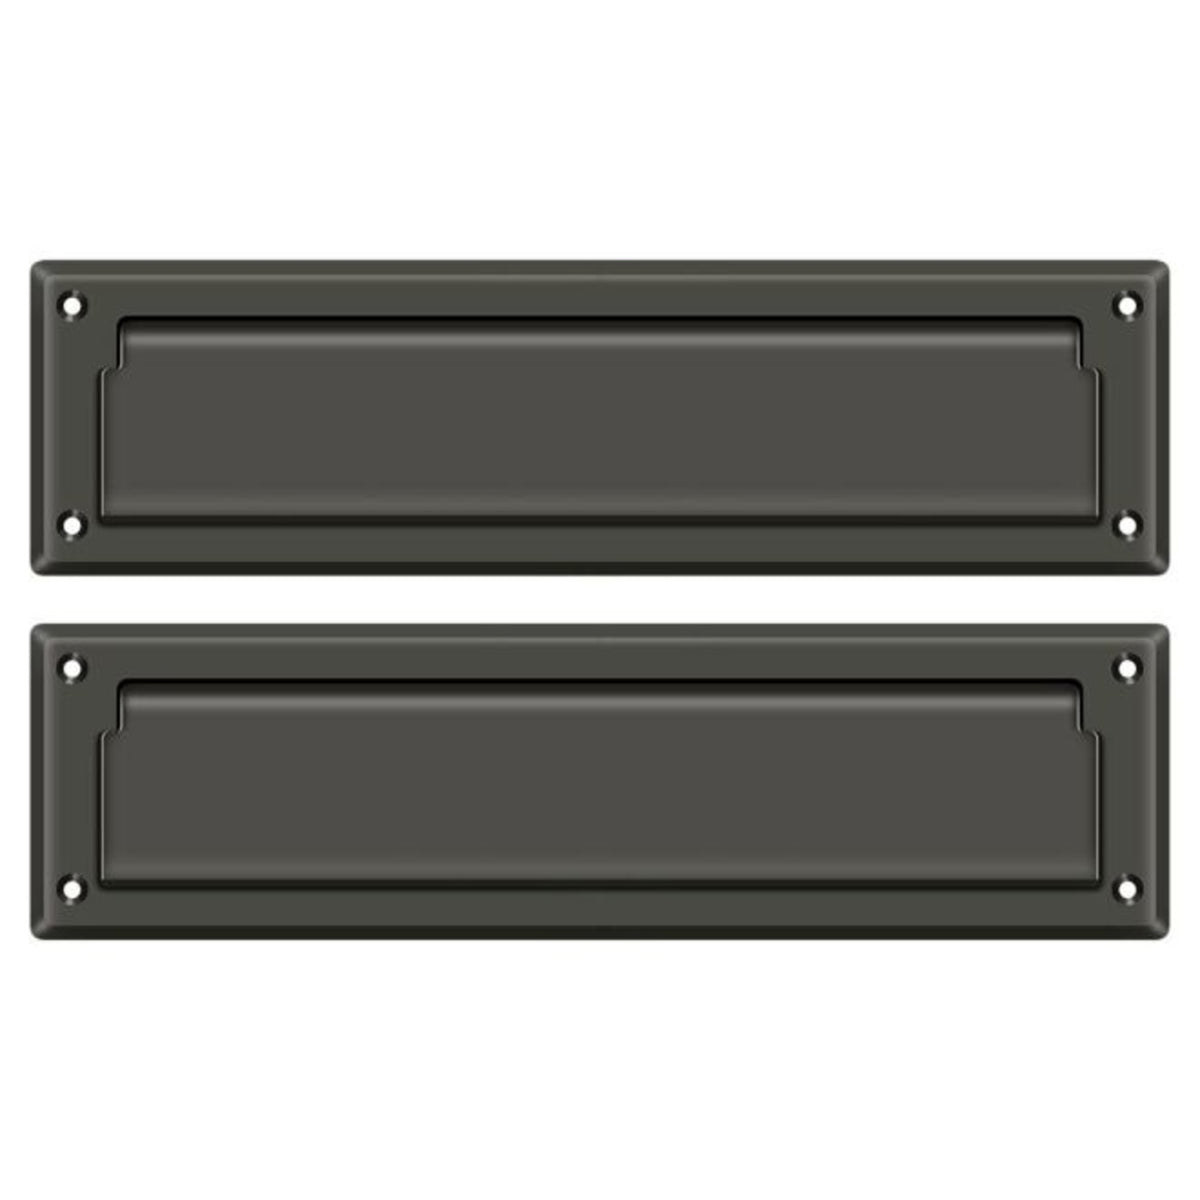 Deltana MS212U10B Mail Slot With Interior Flap, Oil Rubbed Bronze